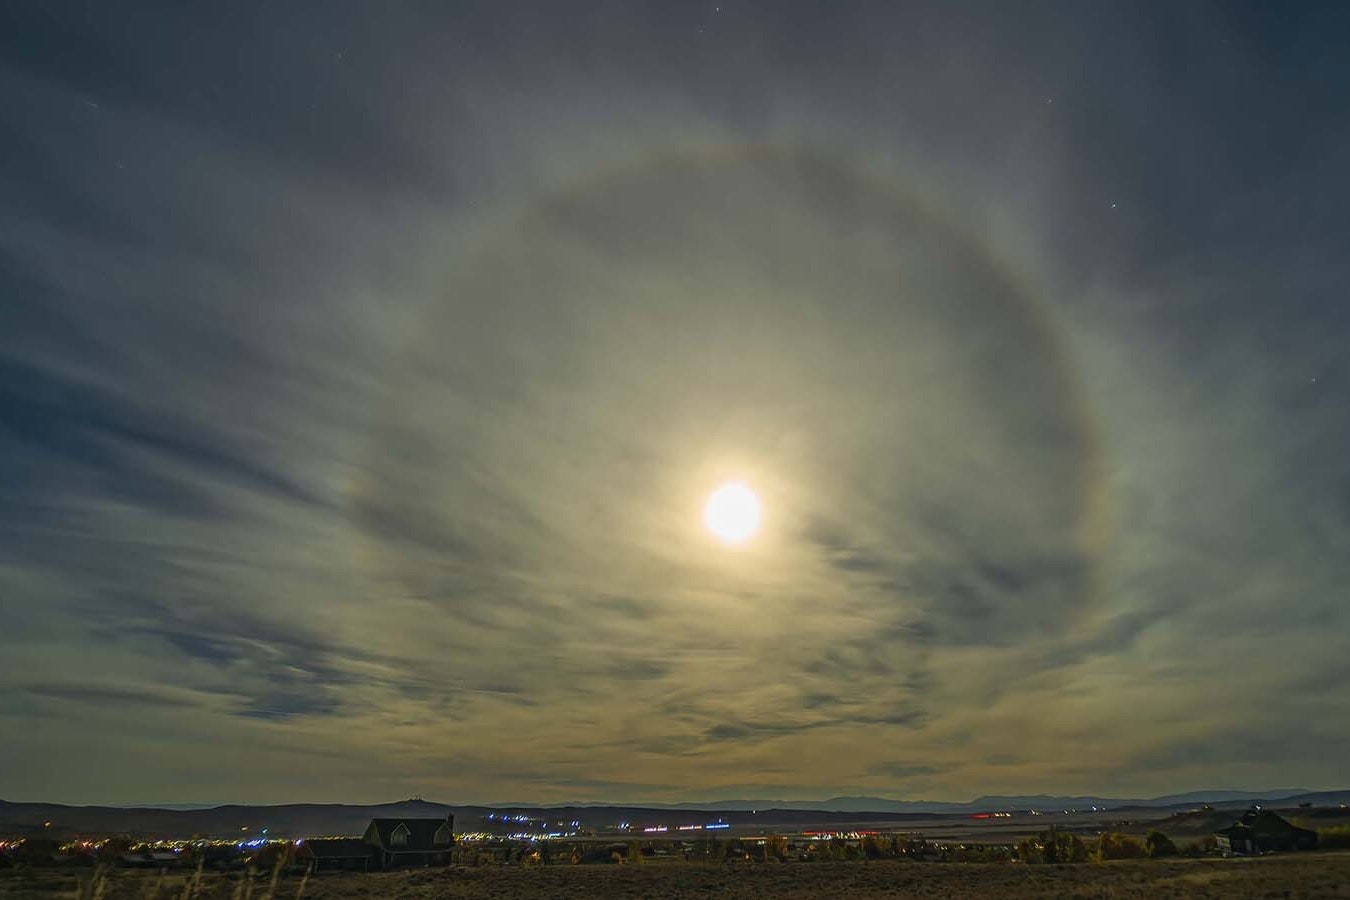 A halo emanates from the supermoon over Sublette County in this image captured by Wyoming photographer Dave Bell.